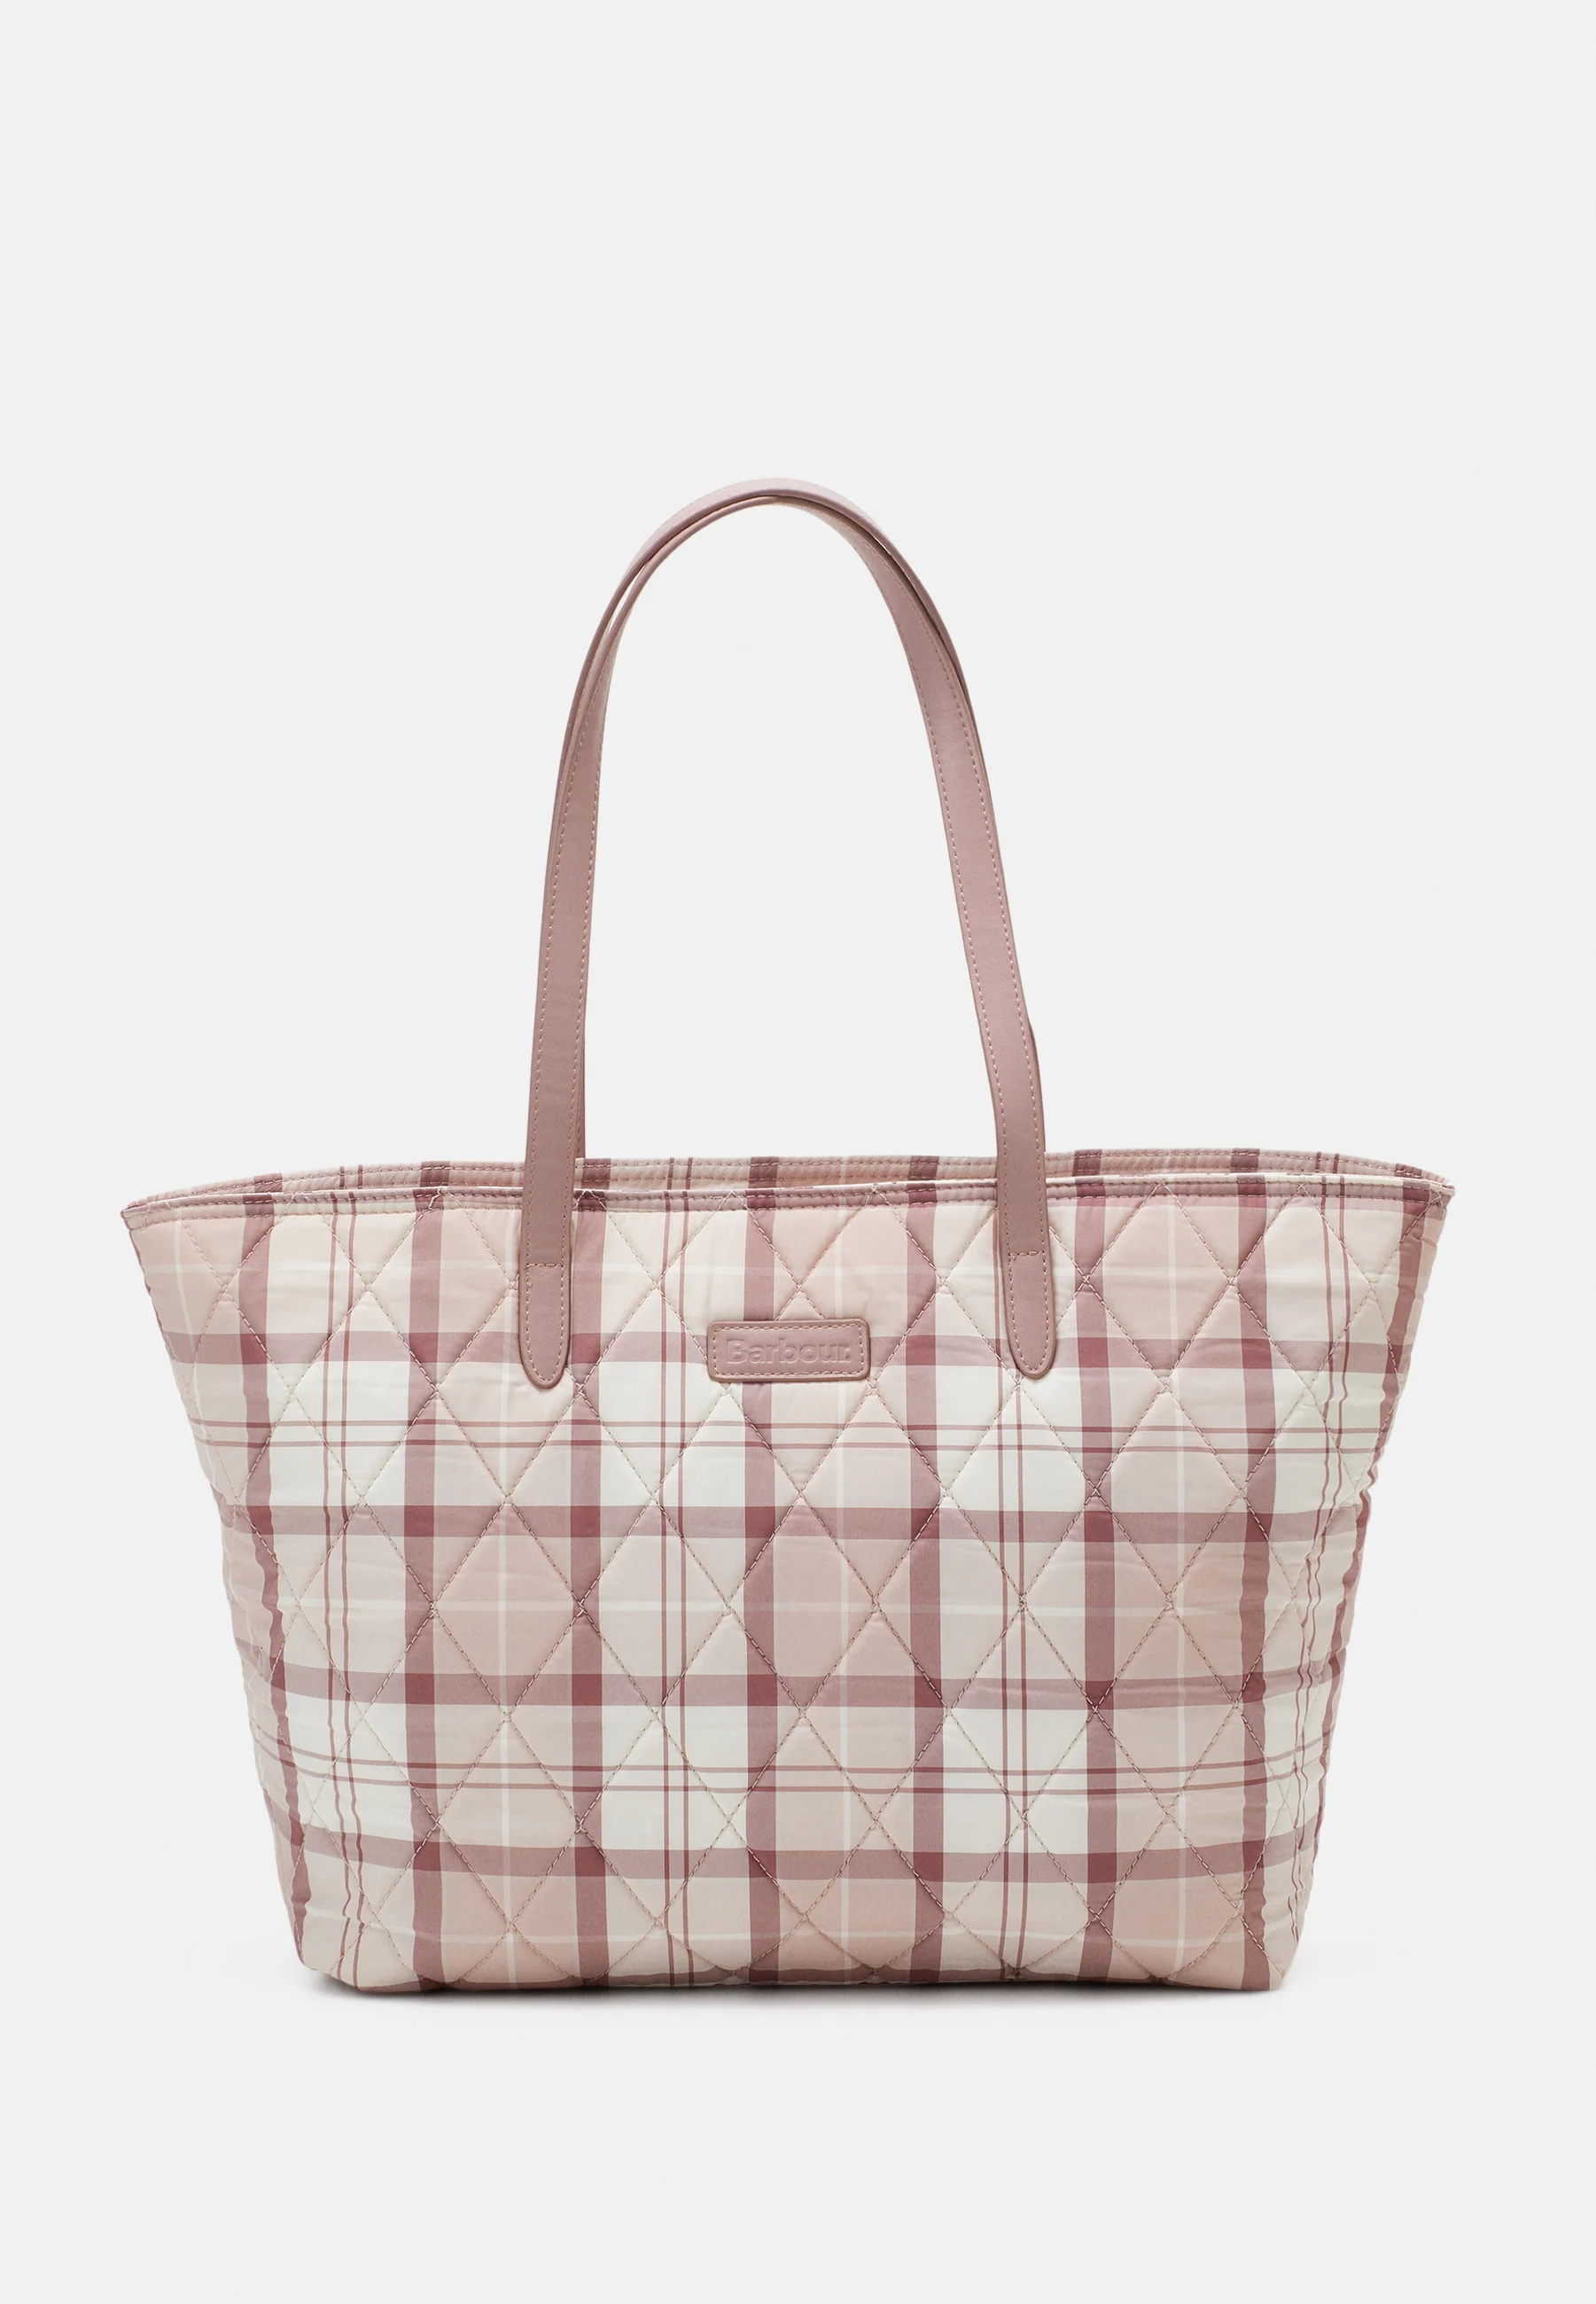 Barbour Wetherham Quilted Tote €59.95, 